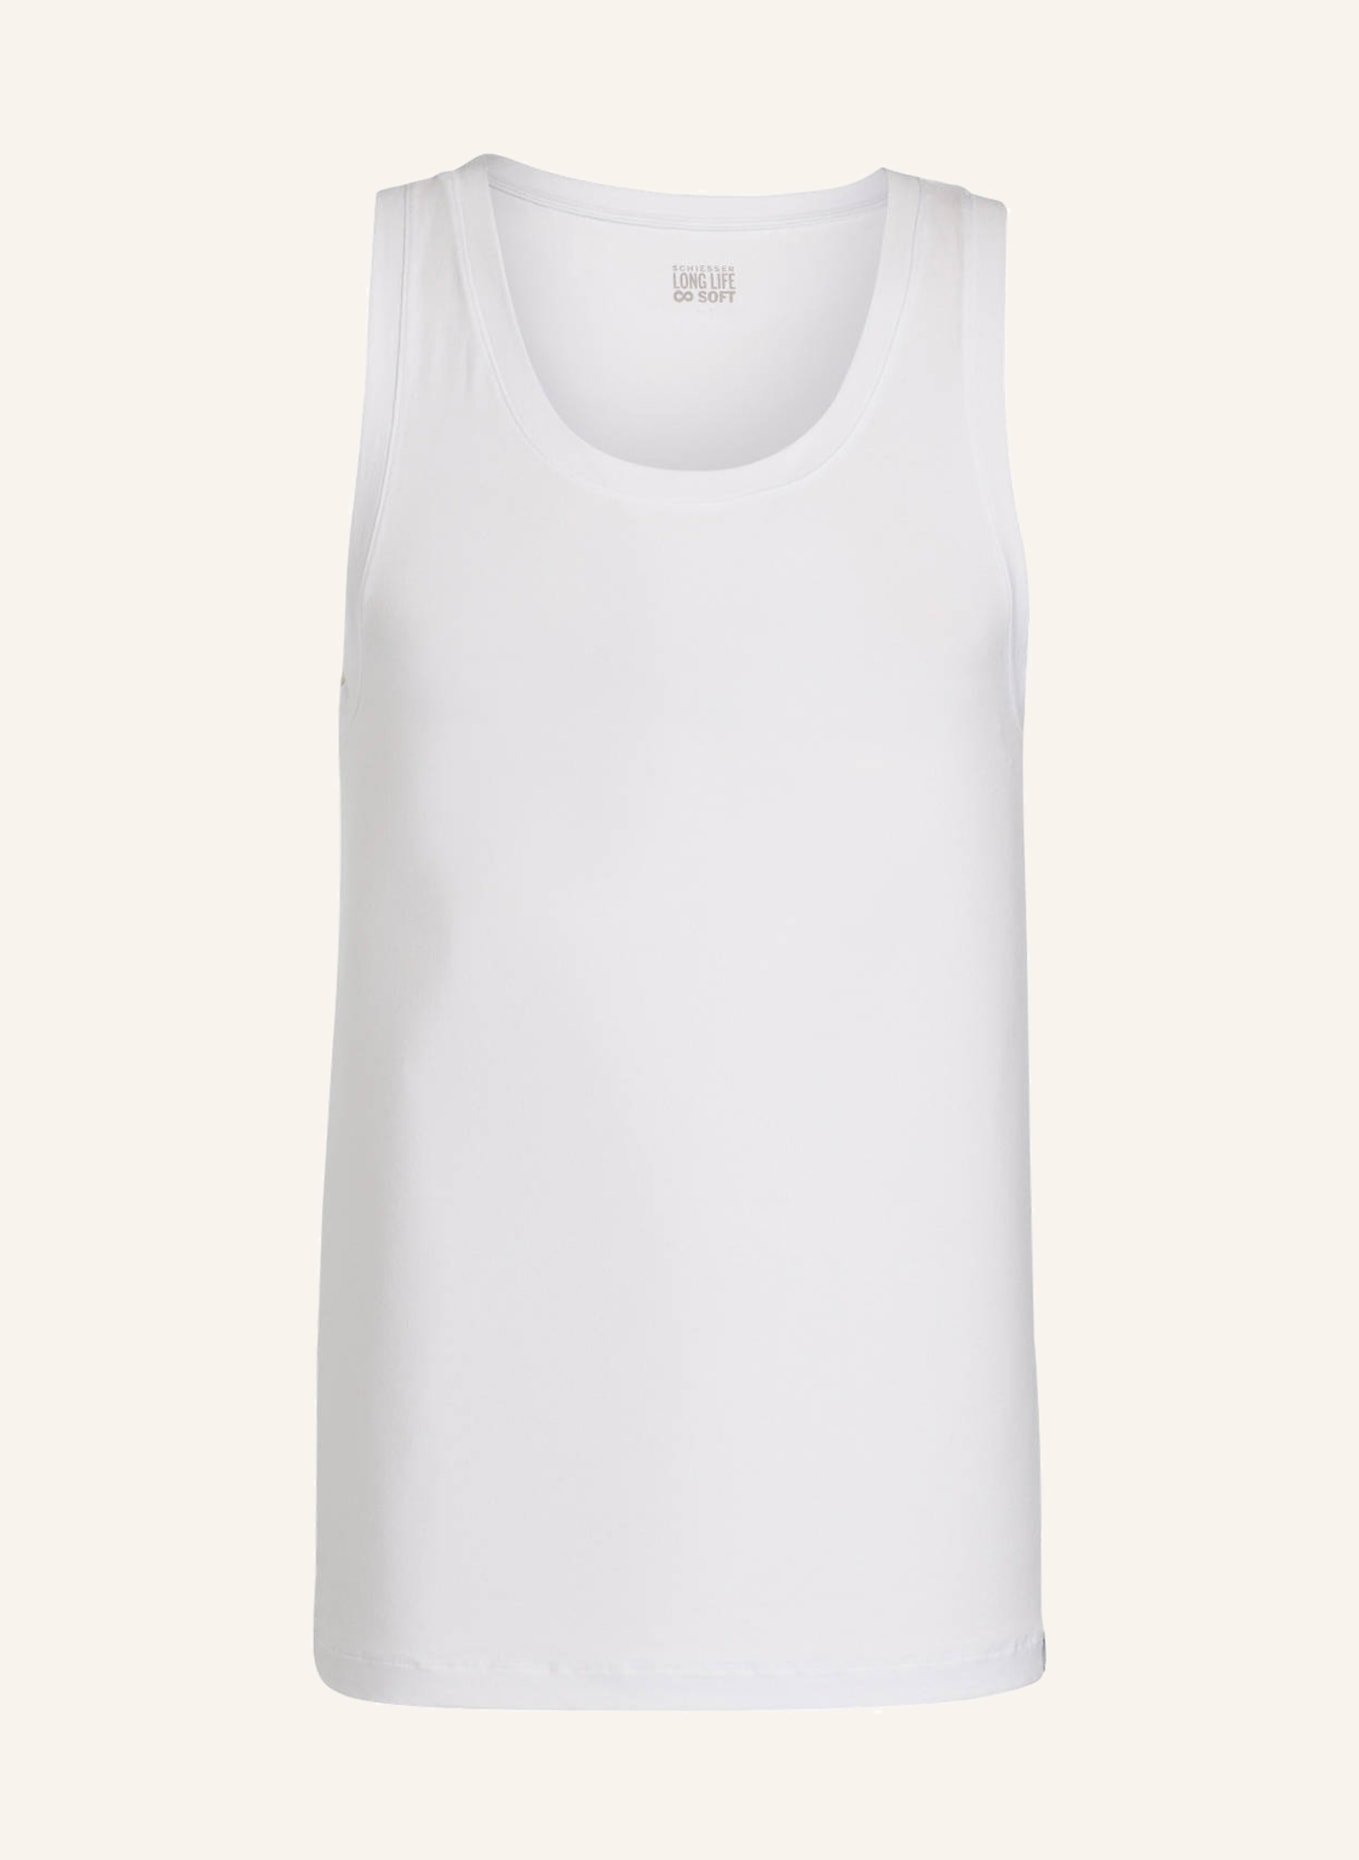 SCHIESSER Undershirt LONG LIFE SOFT, Color: WHITE (Image 1)